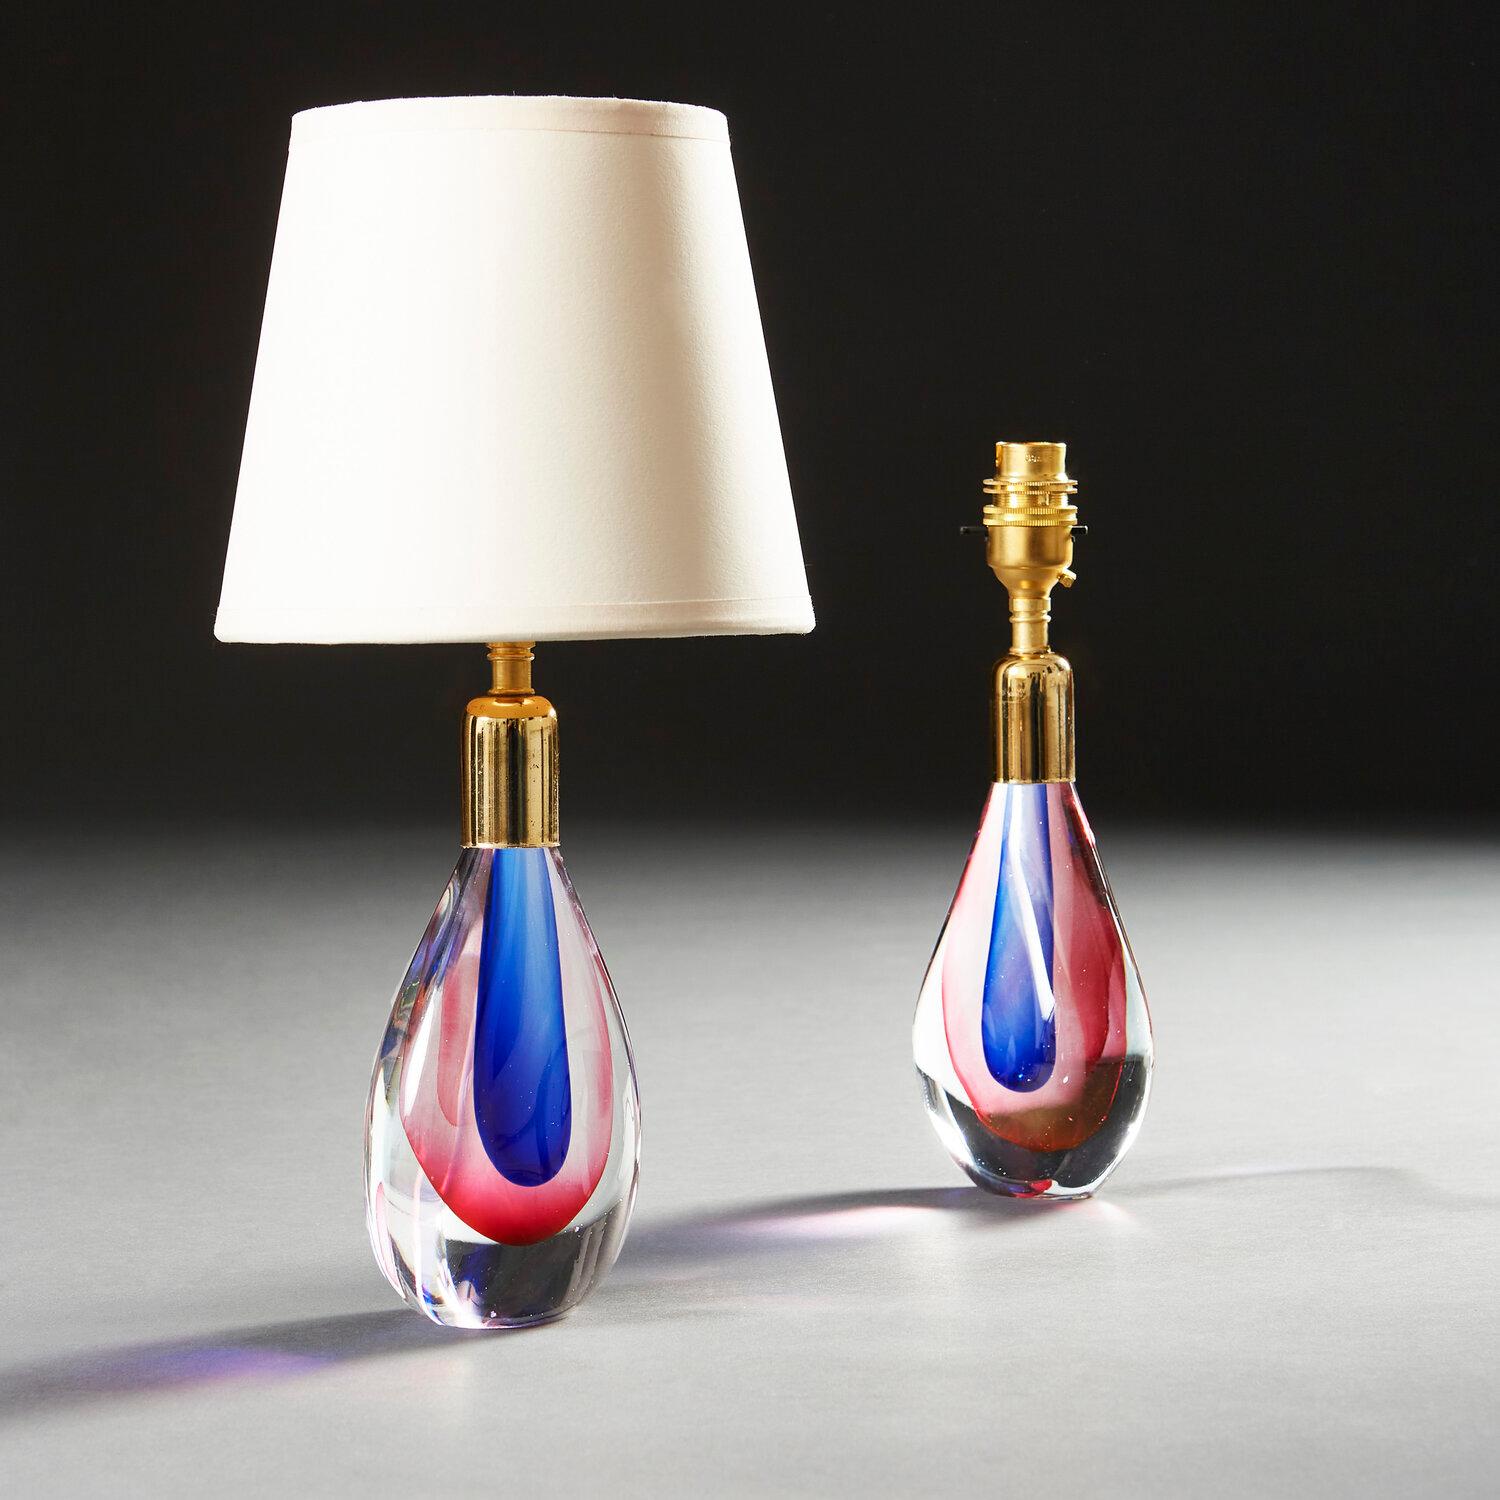 A pair of 1960s Murano glass lamps of teardrop form, with pink and blue to the interior of the glass, with brass collars to the necks.

Please note that the lampshade is not included, and that the lamp is currently wired for the UK.